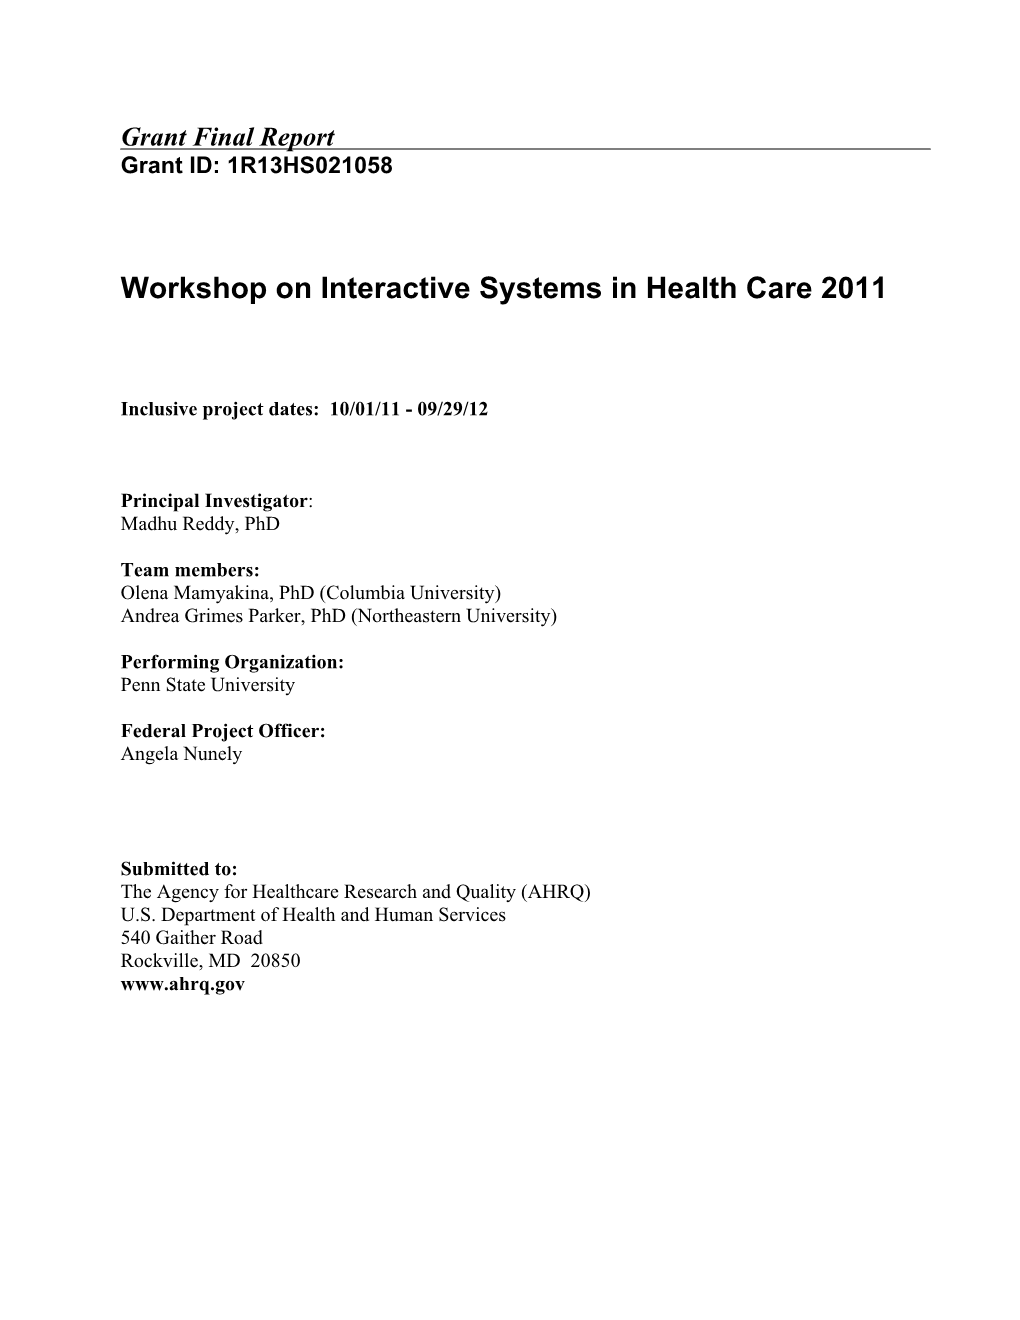 Workshop on Interactive Systems in Health Care 2011